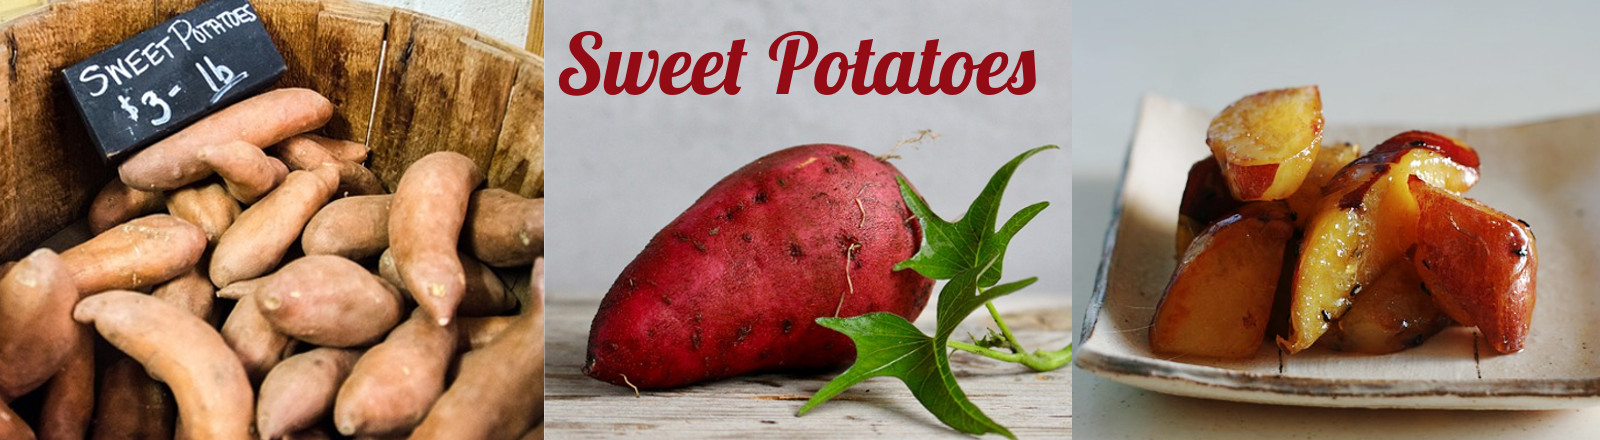 sweet potatoes delicious healthy snack